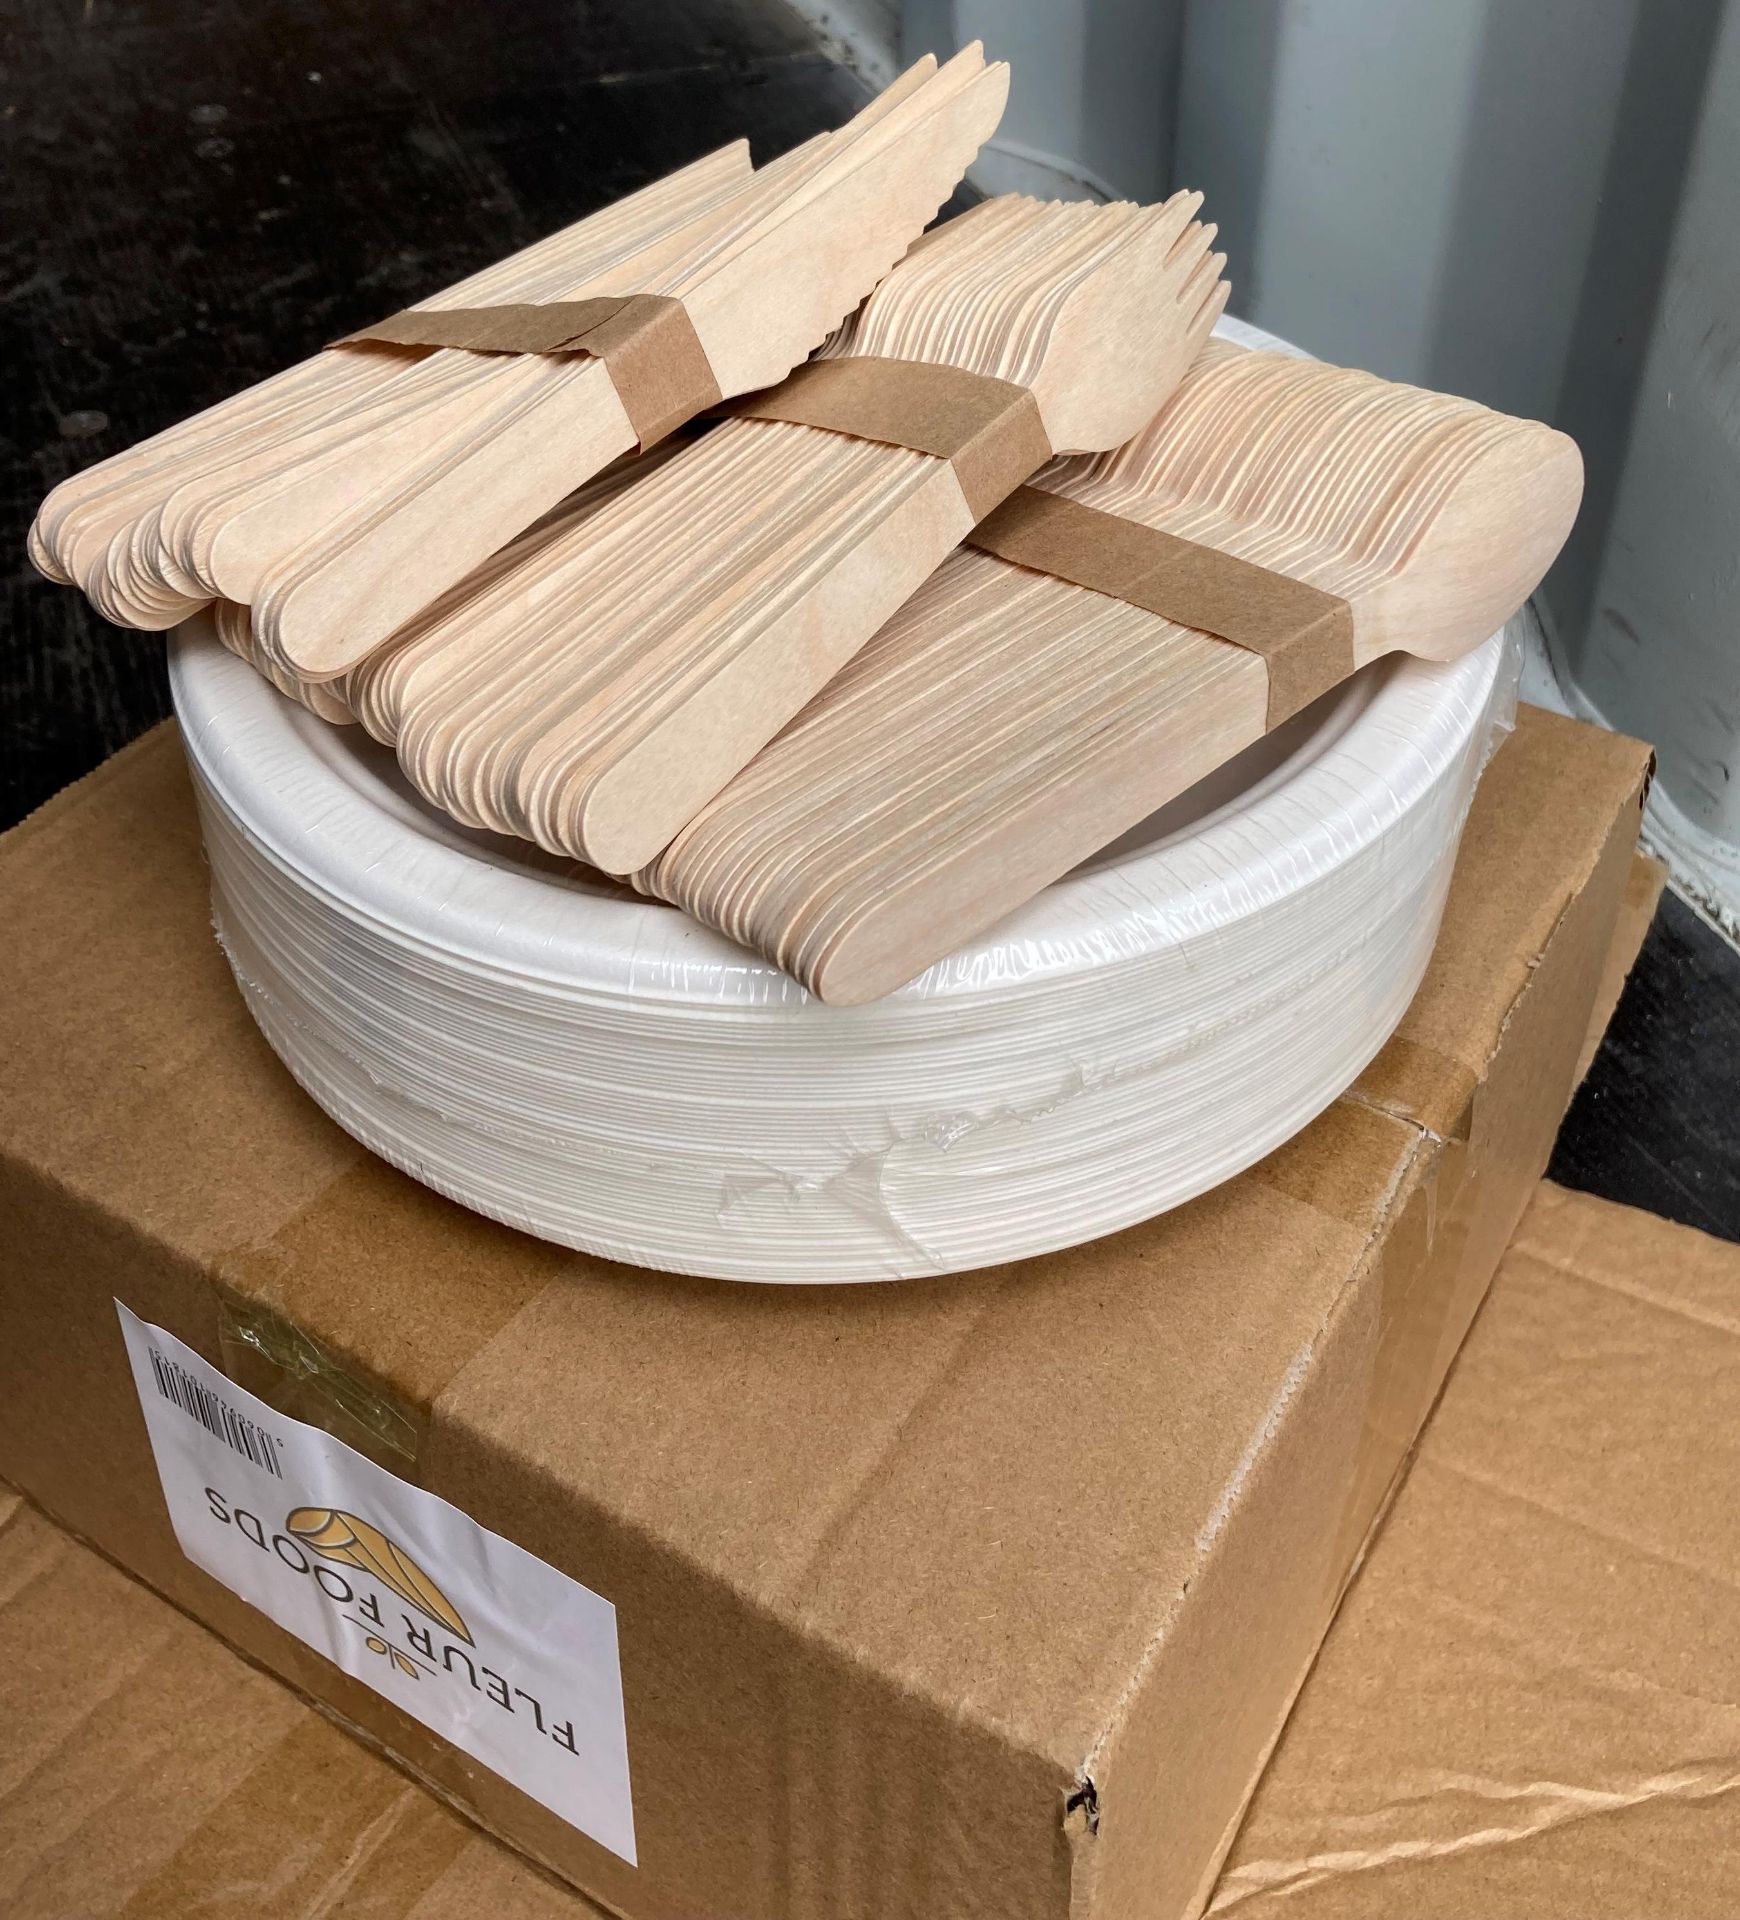 60 x packs and contents of approximately 60 x paper plates, sets of wooden knives, - Bild 2 aus 5